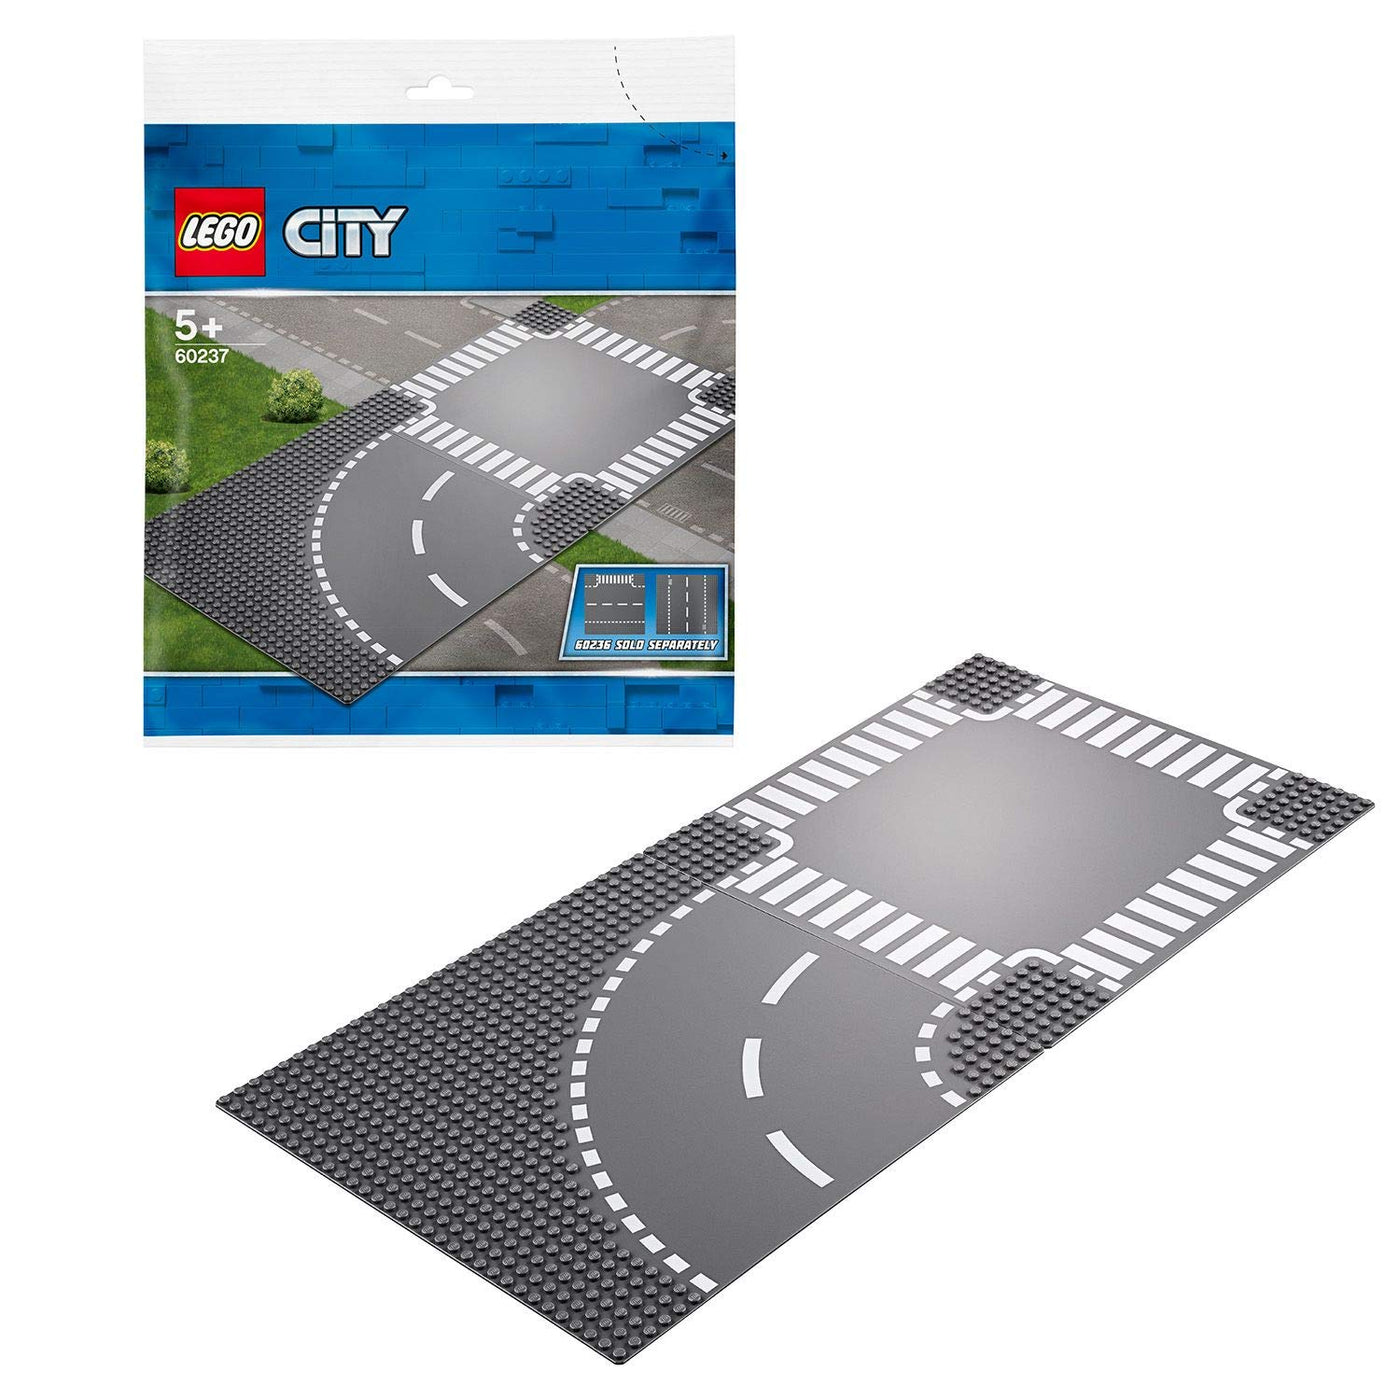 Curve and Crossroad 60237 - City | Lego